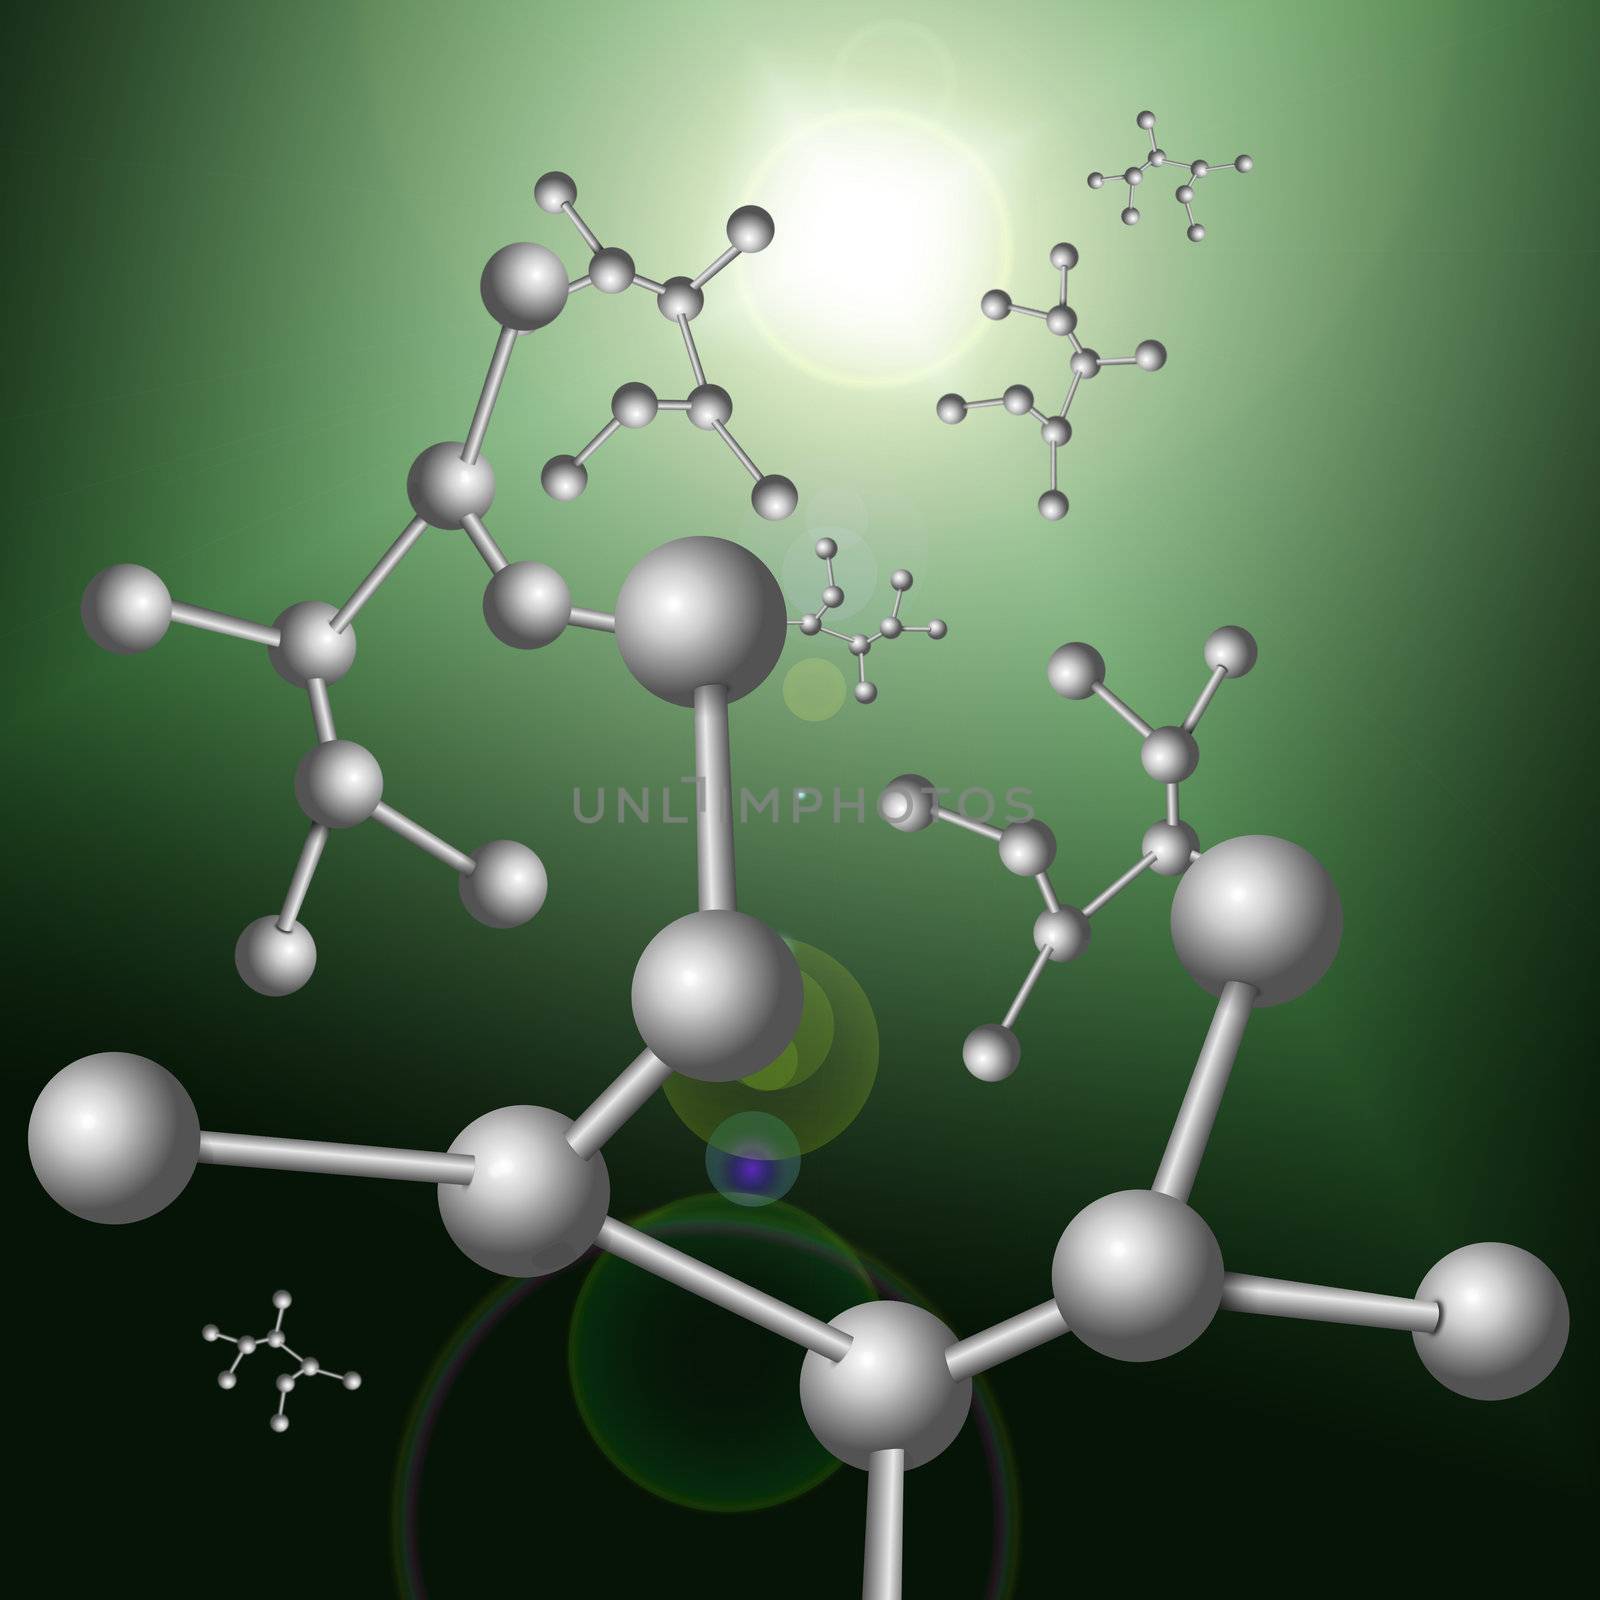 Illustration depicting molecular structure concept with green abstract background.